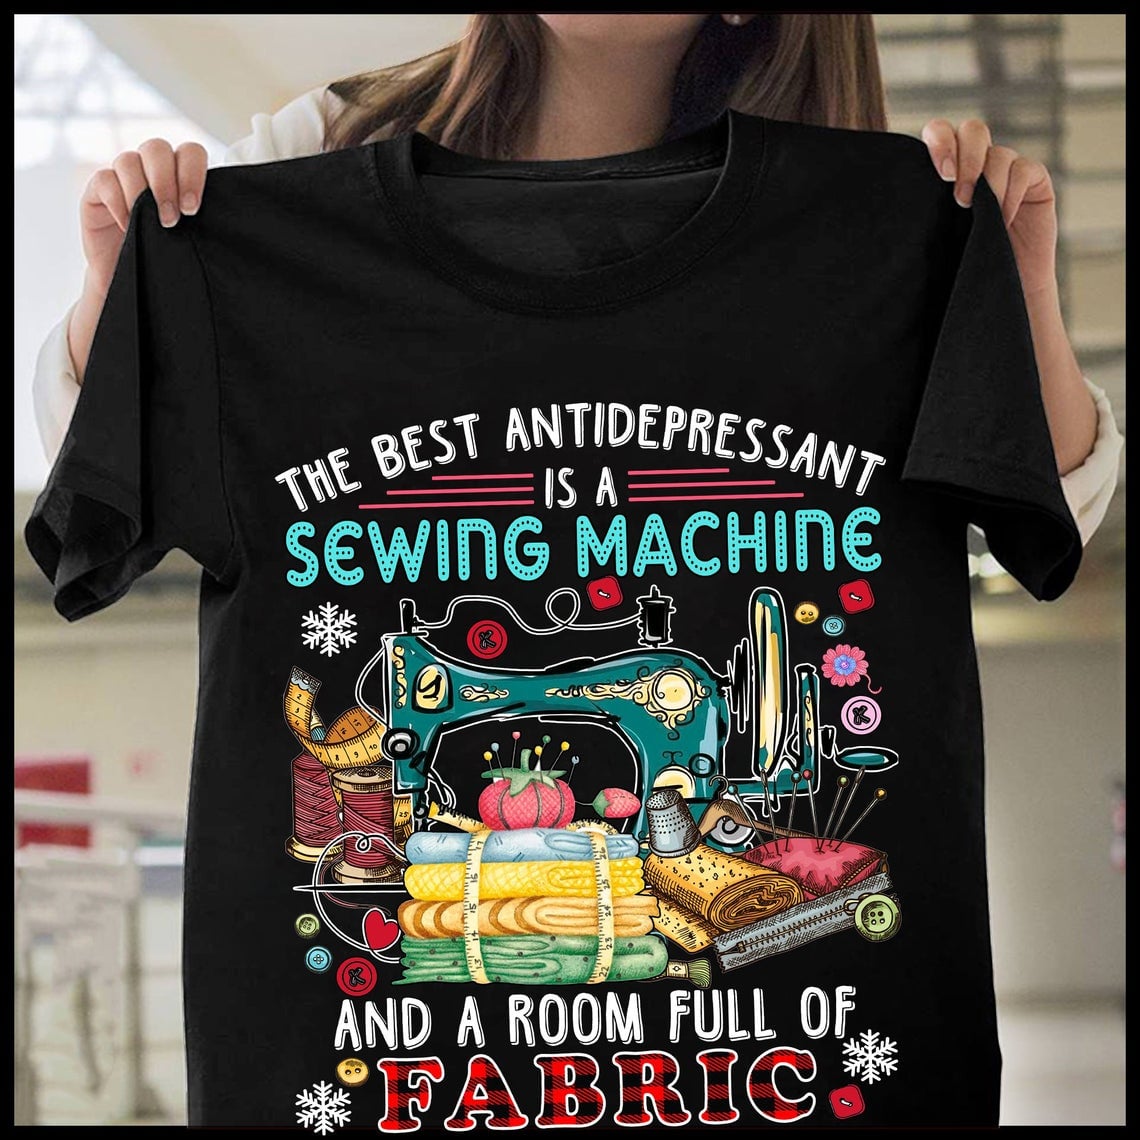 The best antidepressant is a sewing machine and a room full of fabric - Love sewing